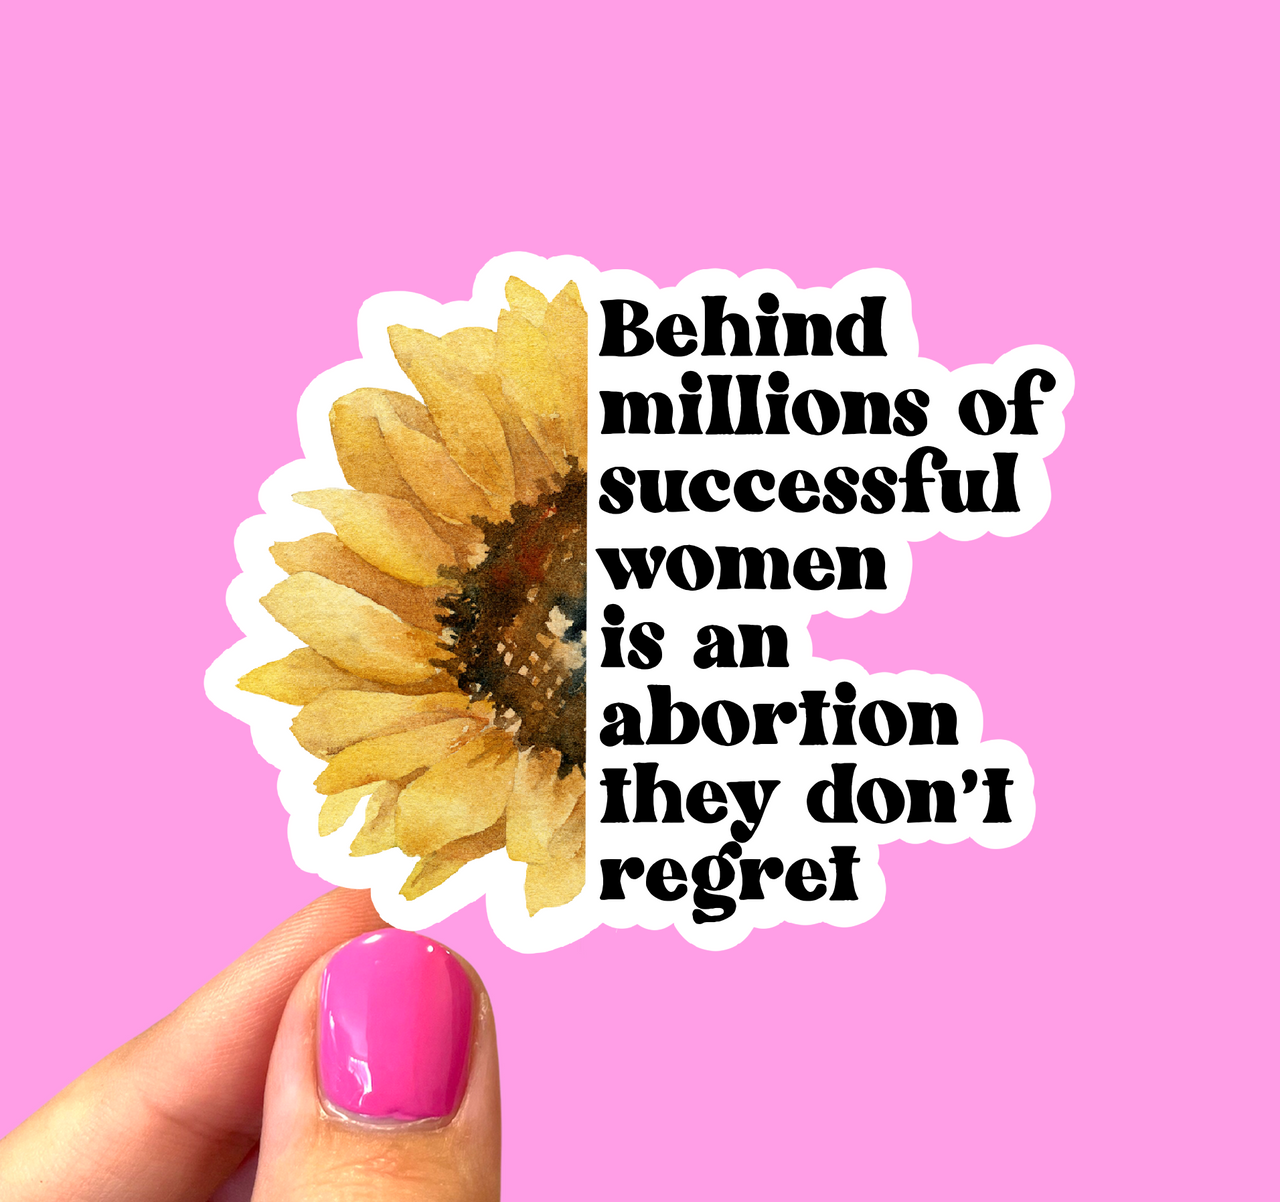 Behind millions of successful women is an abortion they don’t regret